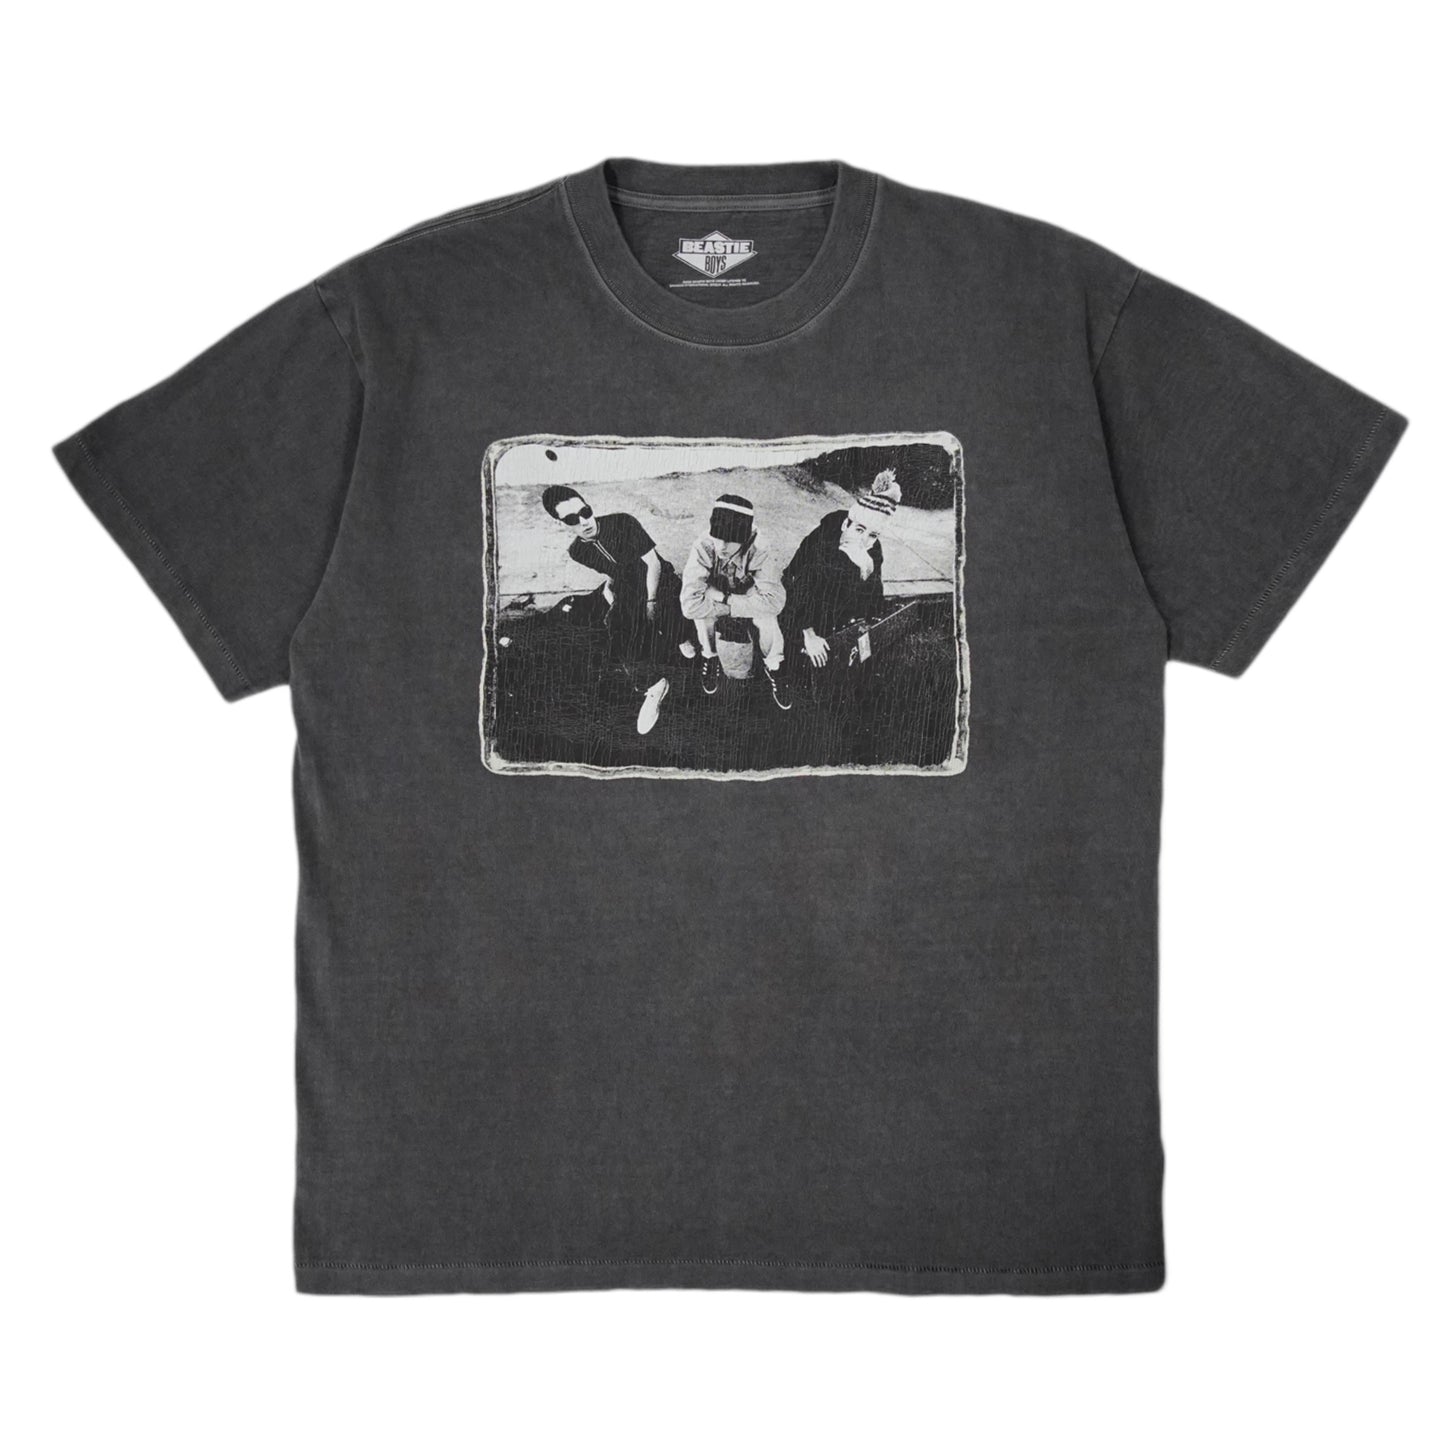 INSONNIA PROJECTS / BEASTIE BOYS CHECK YOUR HEAD PHOTO T-SHIRT